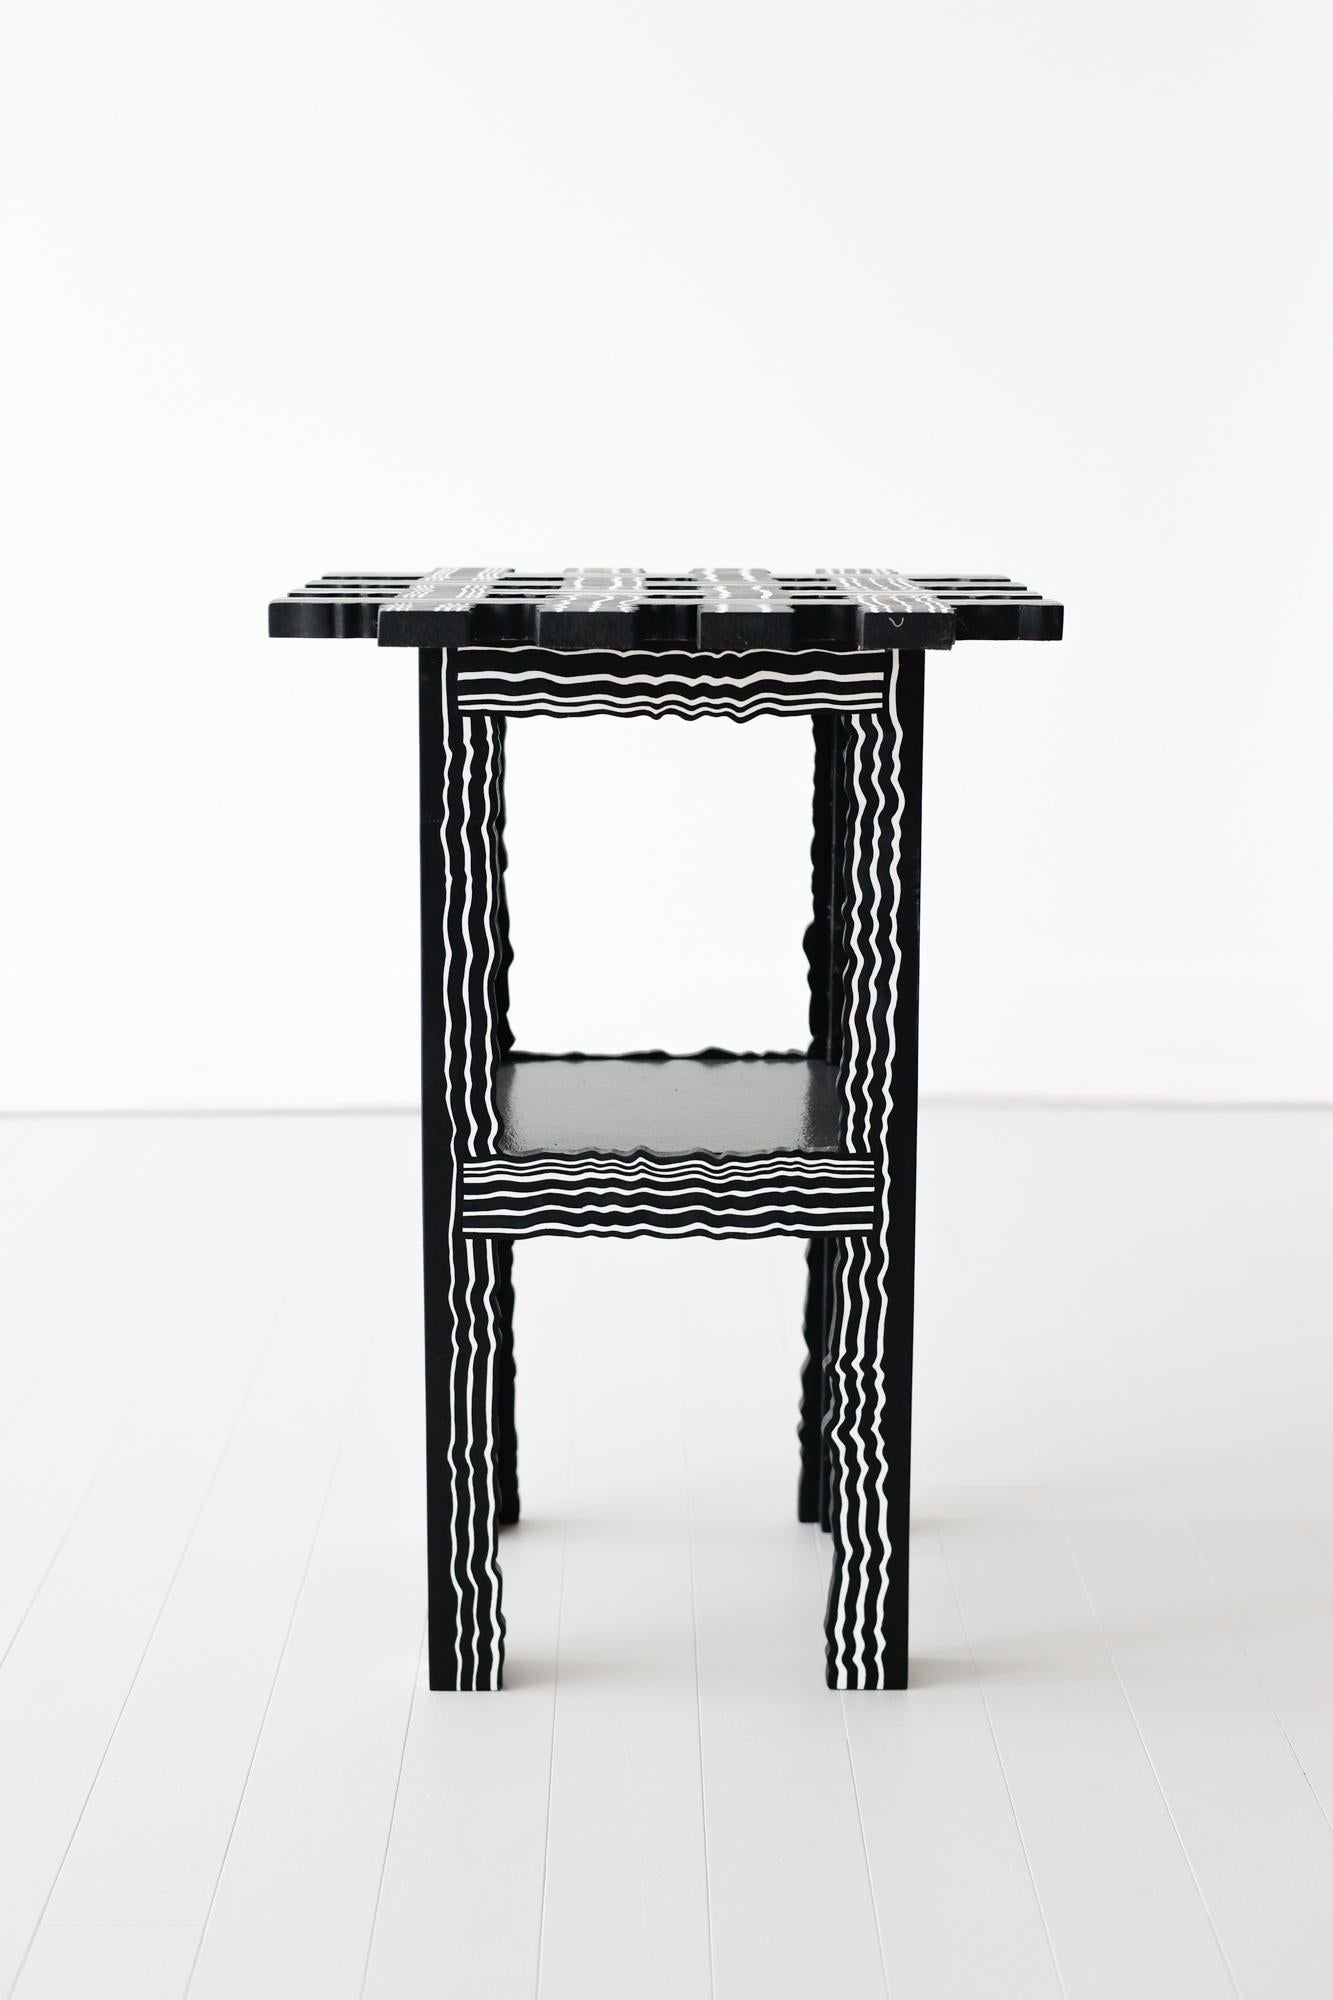 Grid Table - Sculpture by Jason Andrew Turner